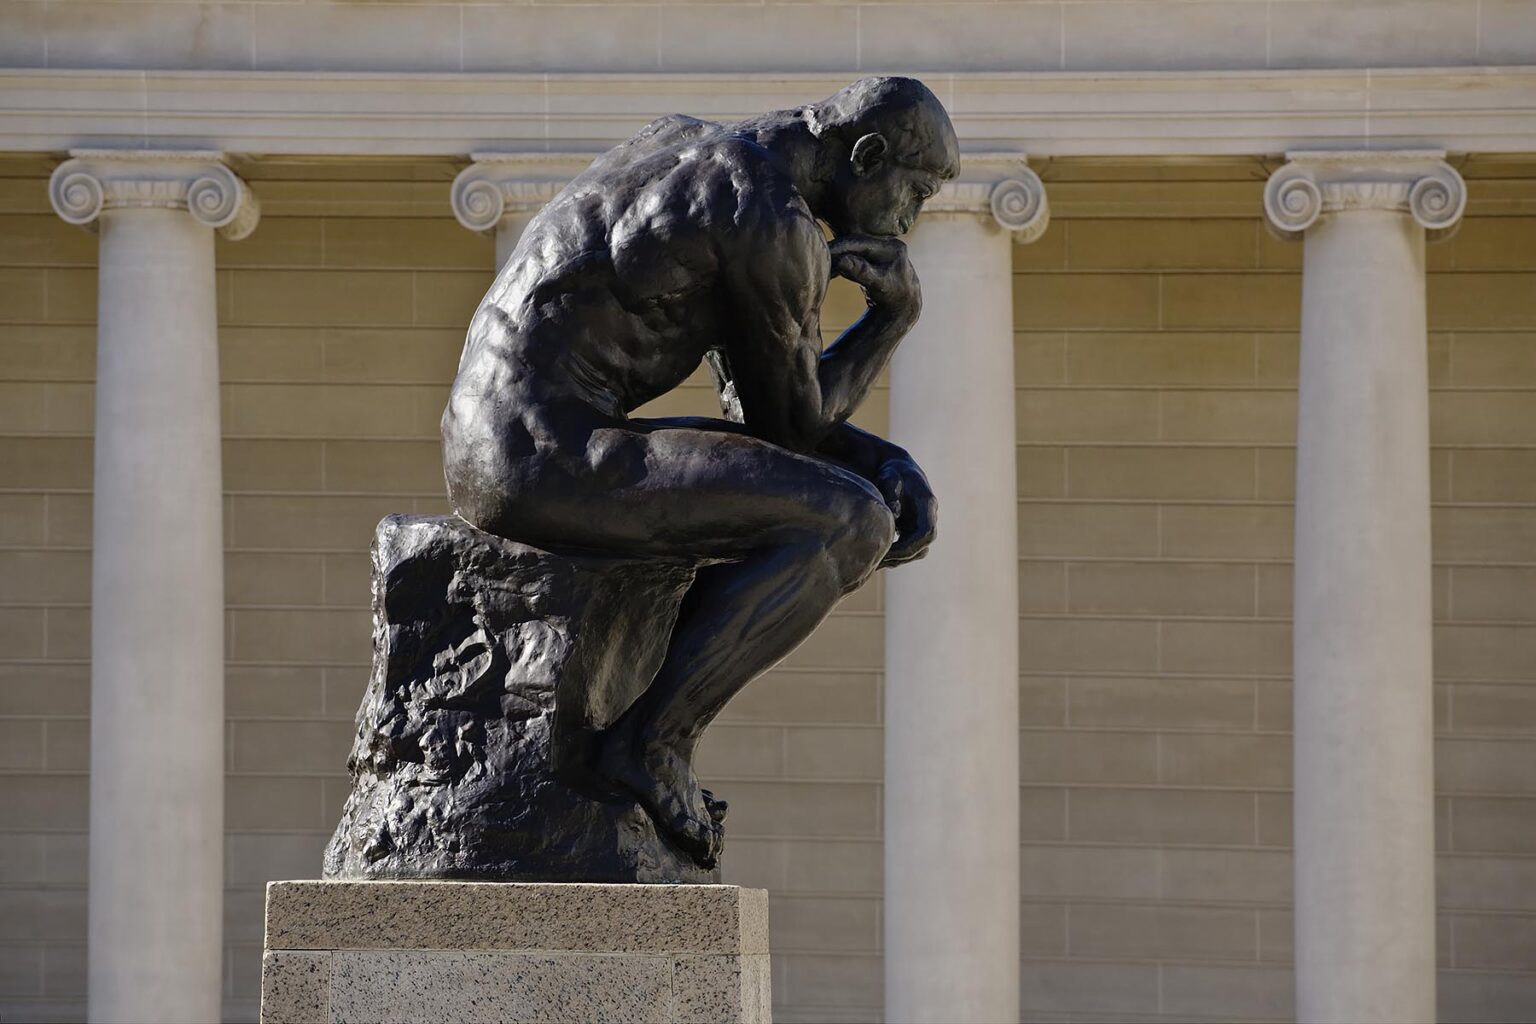 The courtyard of the LEGION OF HONOR with an Auguste Rodin sculpture titled THE THINKER - SAN FRANCISCO, CALIFORNIA